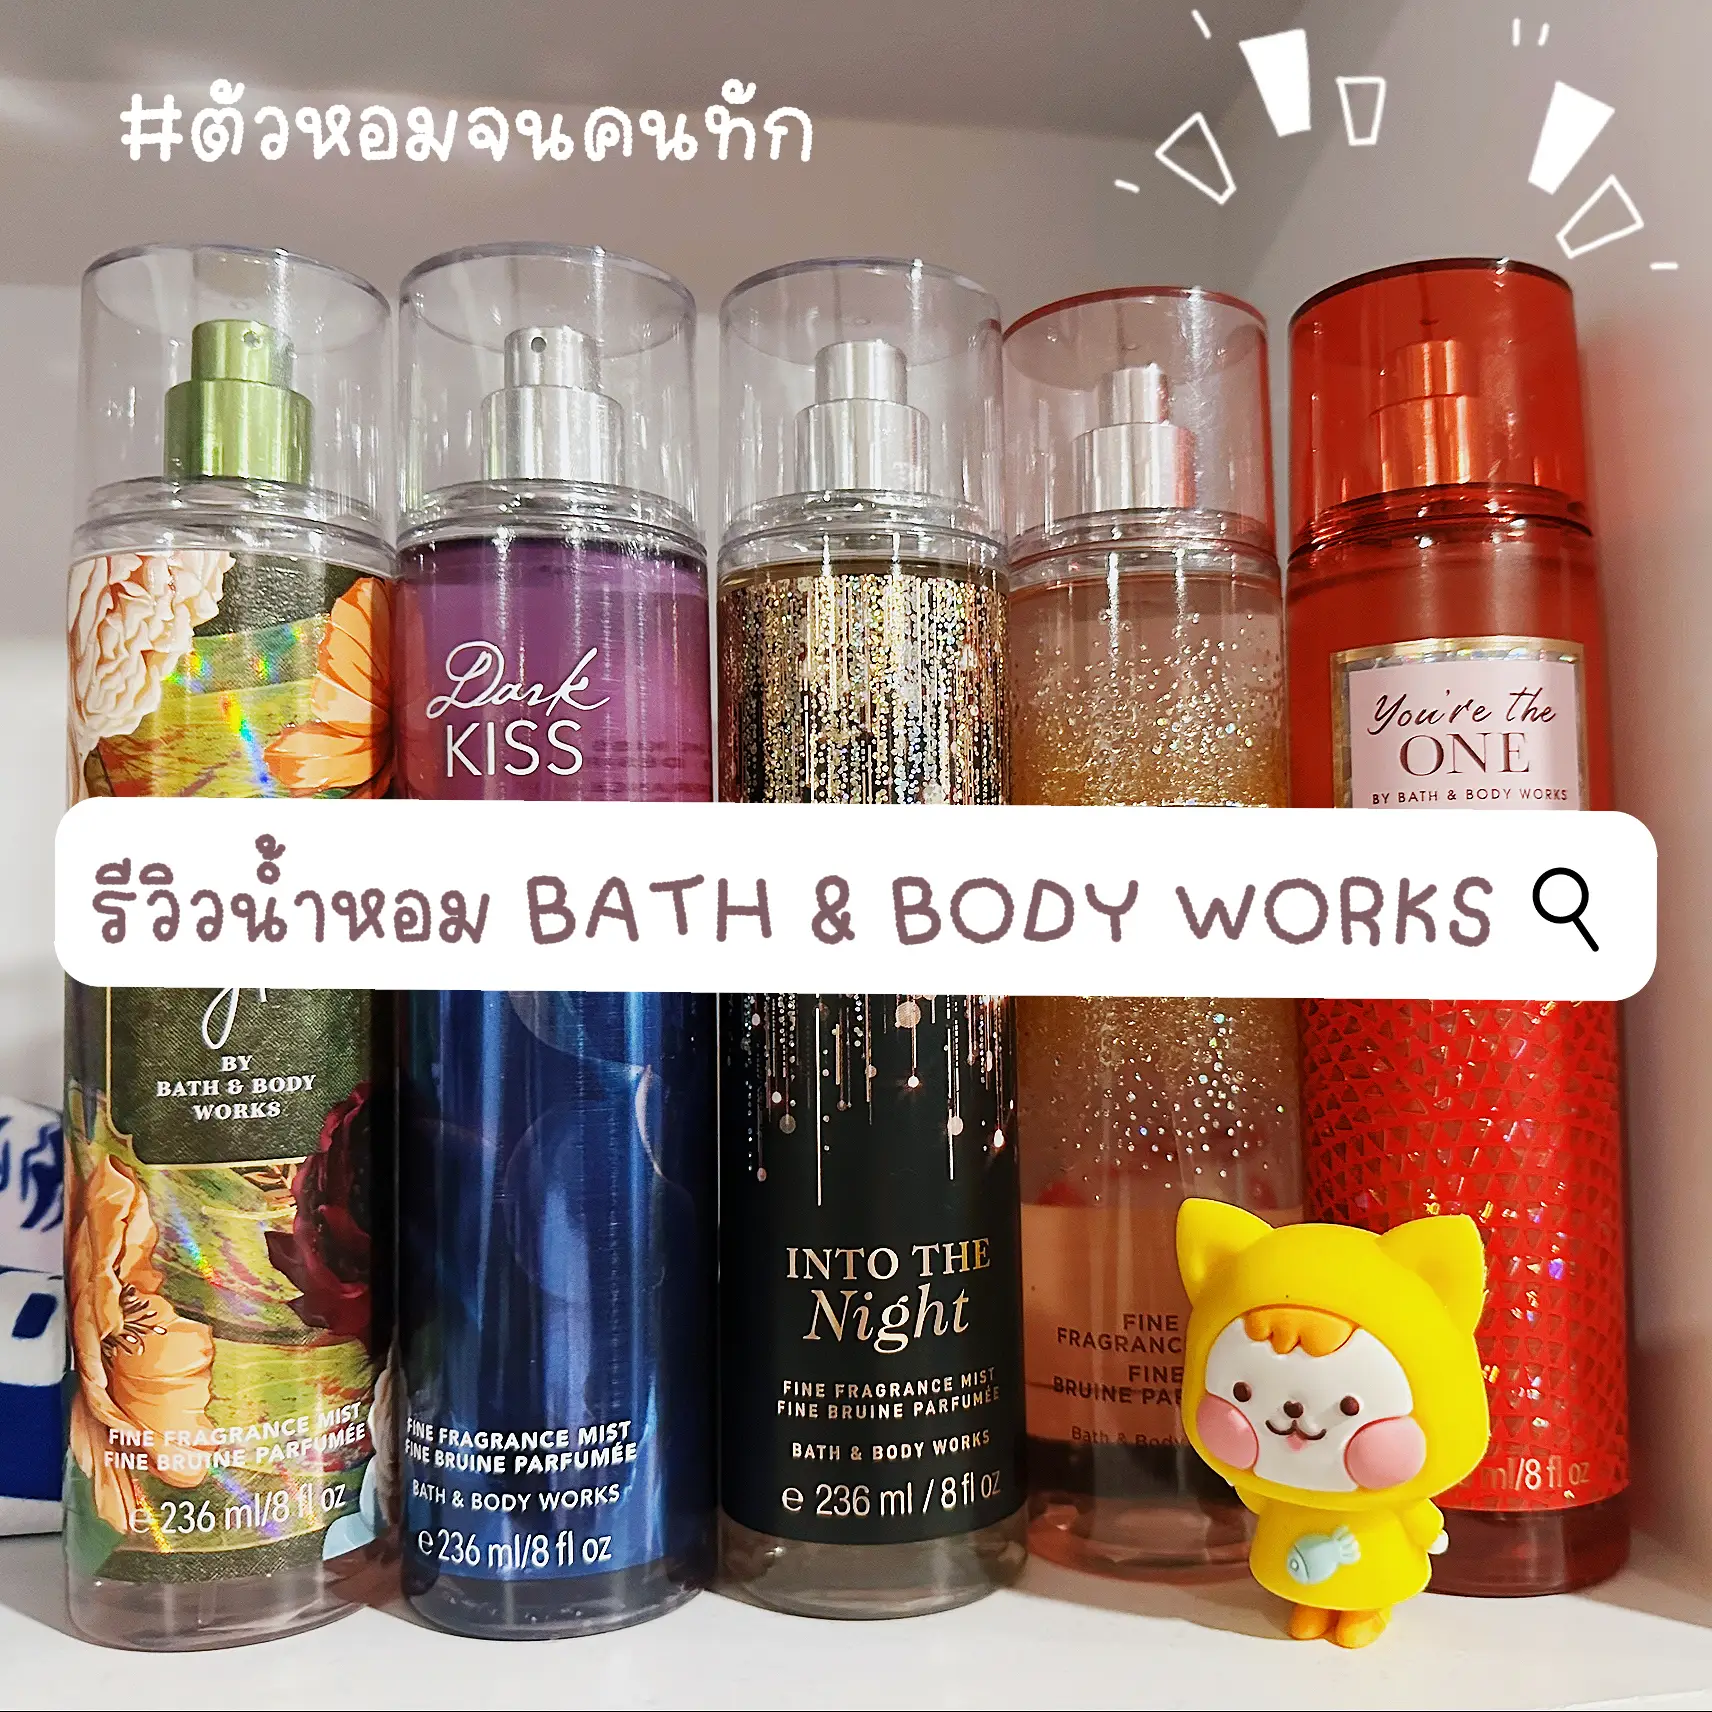 BATH AND BODY WORKS PERFUME REVIEW 🧚🏻‍♀️, HARRY BEAUTY PEOPLE!!, Gallery posted by bellbelt